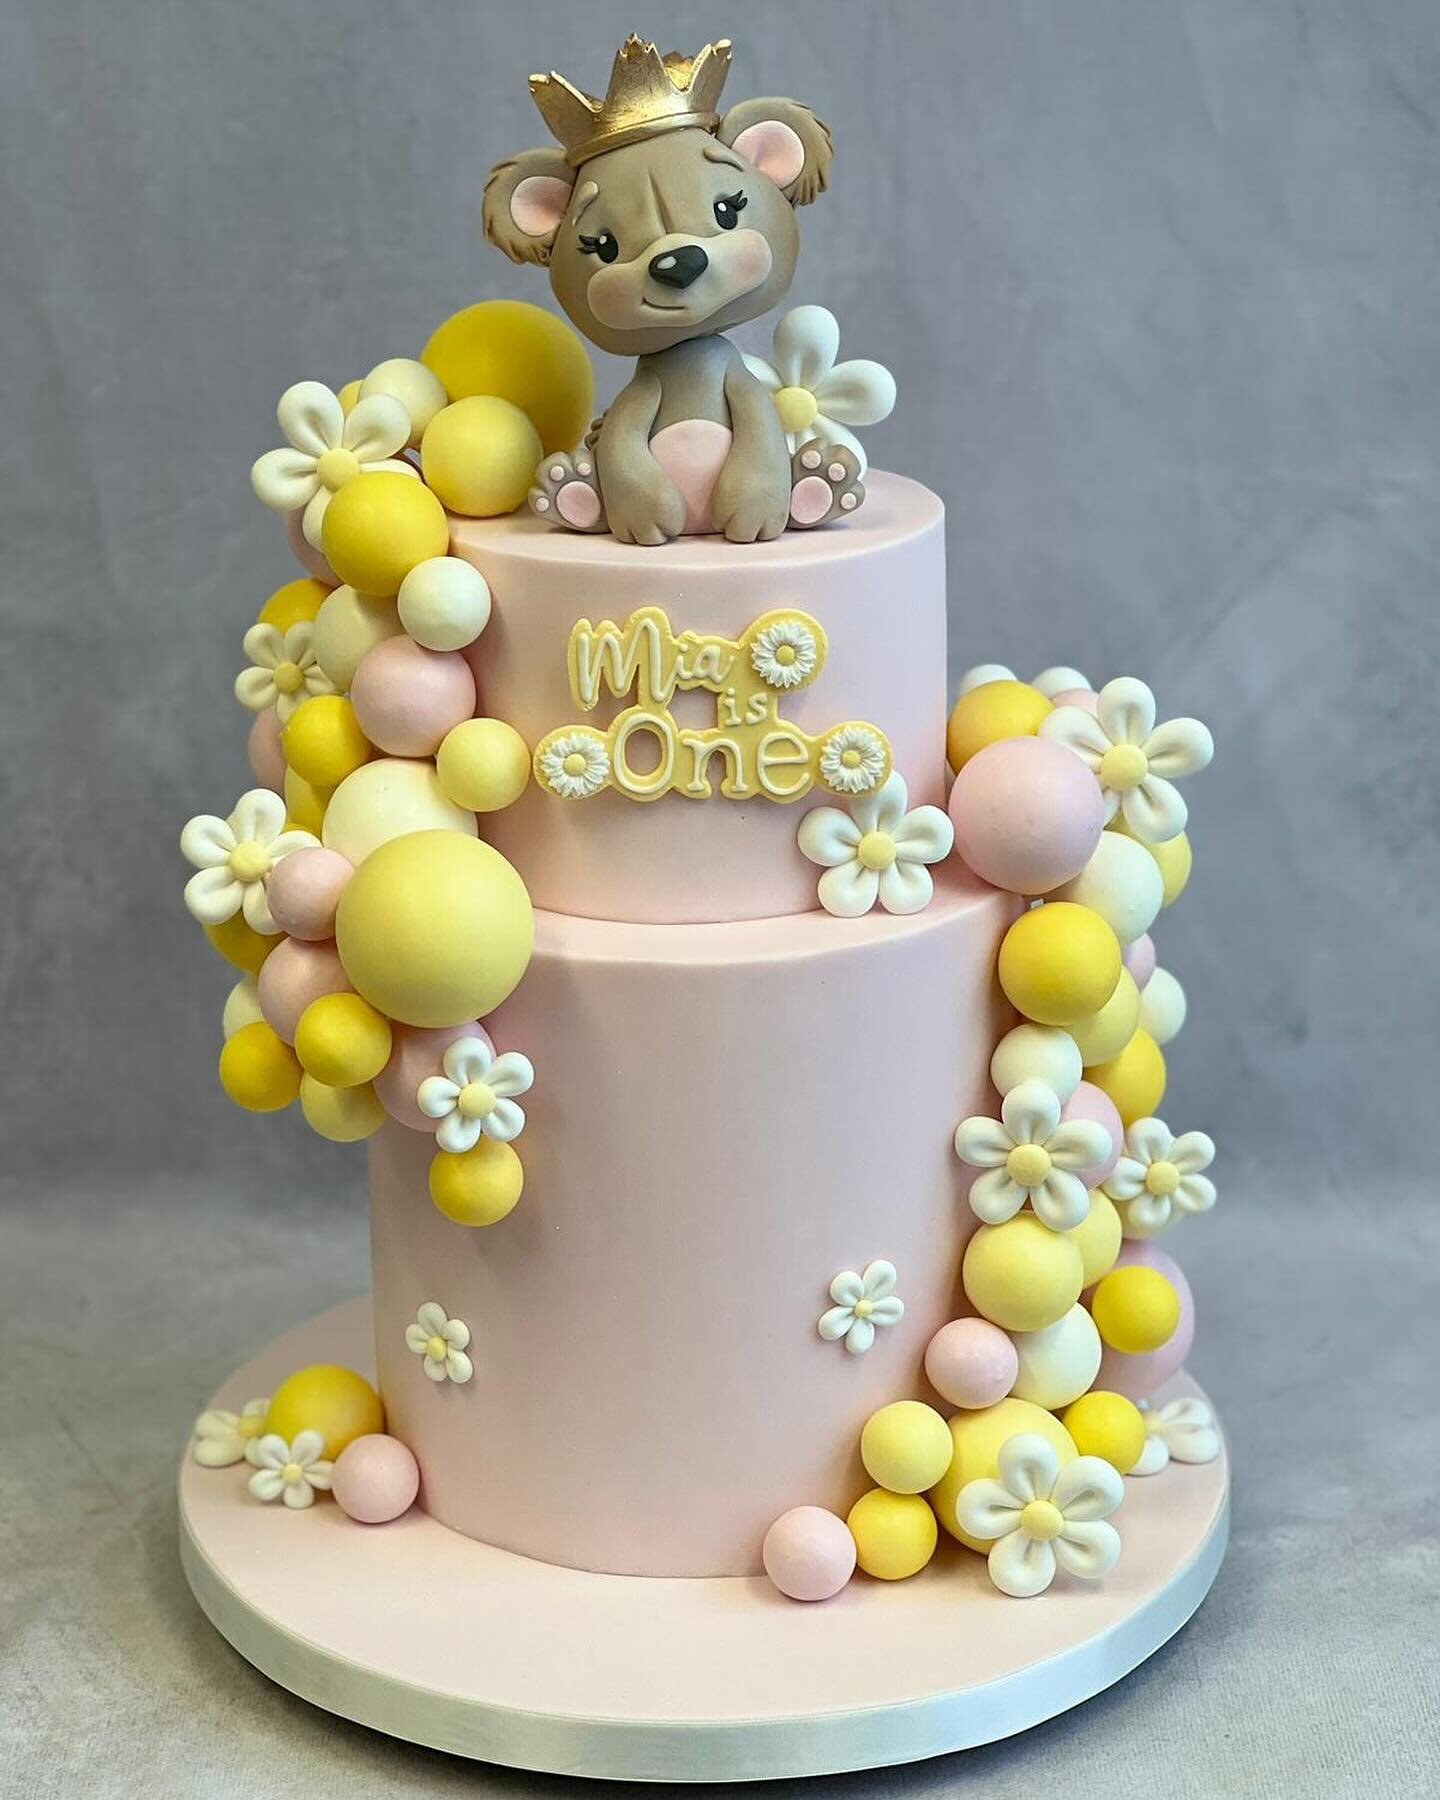 The perfect colour combination for this time of year 💛🩷🤍

This super cute cake was made for a first birthday celebration. Swipe to see matching cookies.

Event by @bolteeventdesign

.
#cake #cakeart #birthdaycake #firstbirthdaycake #childrensbirth